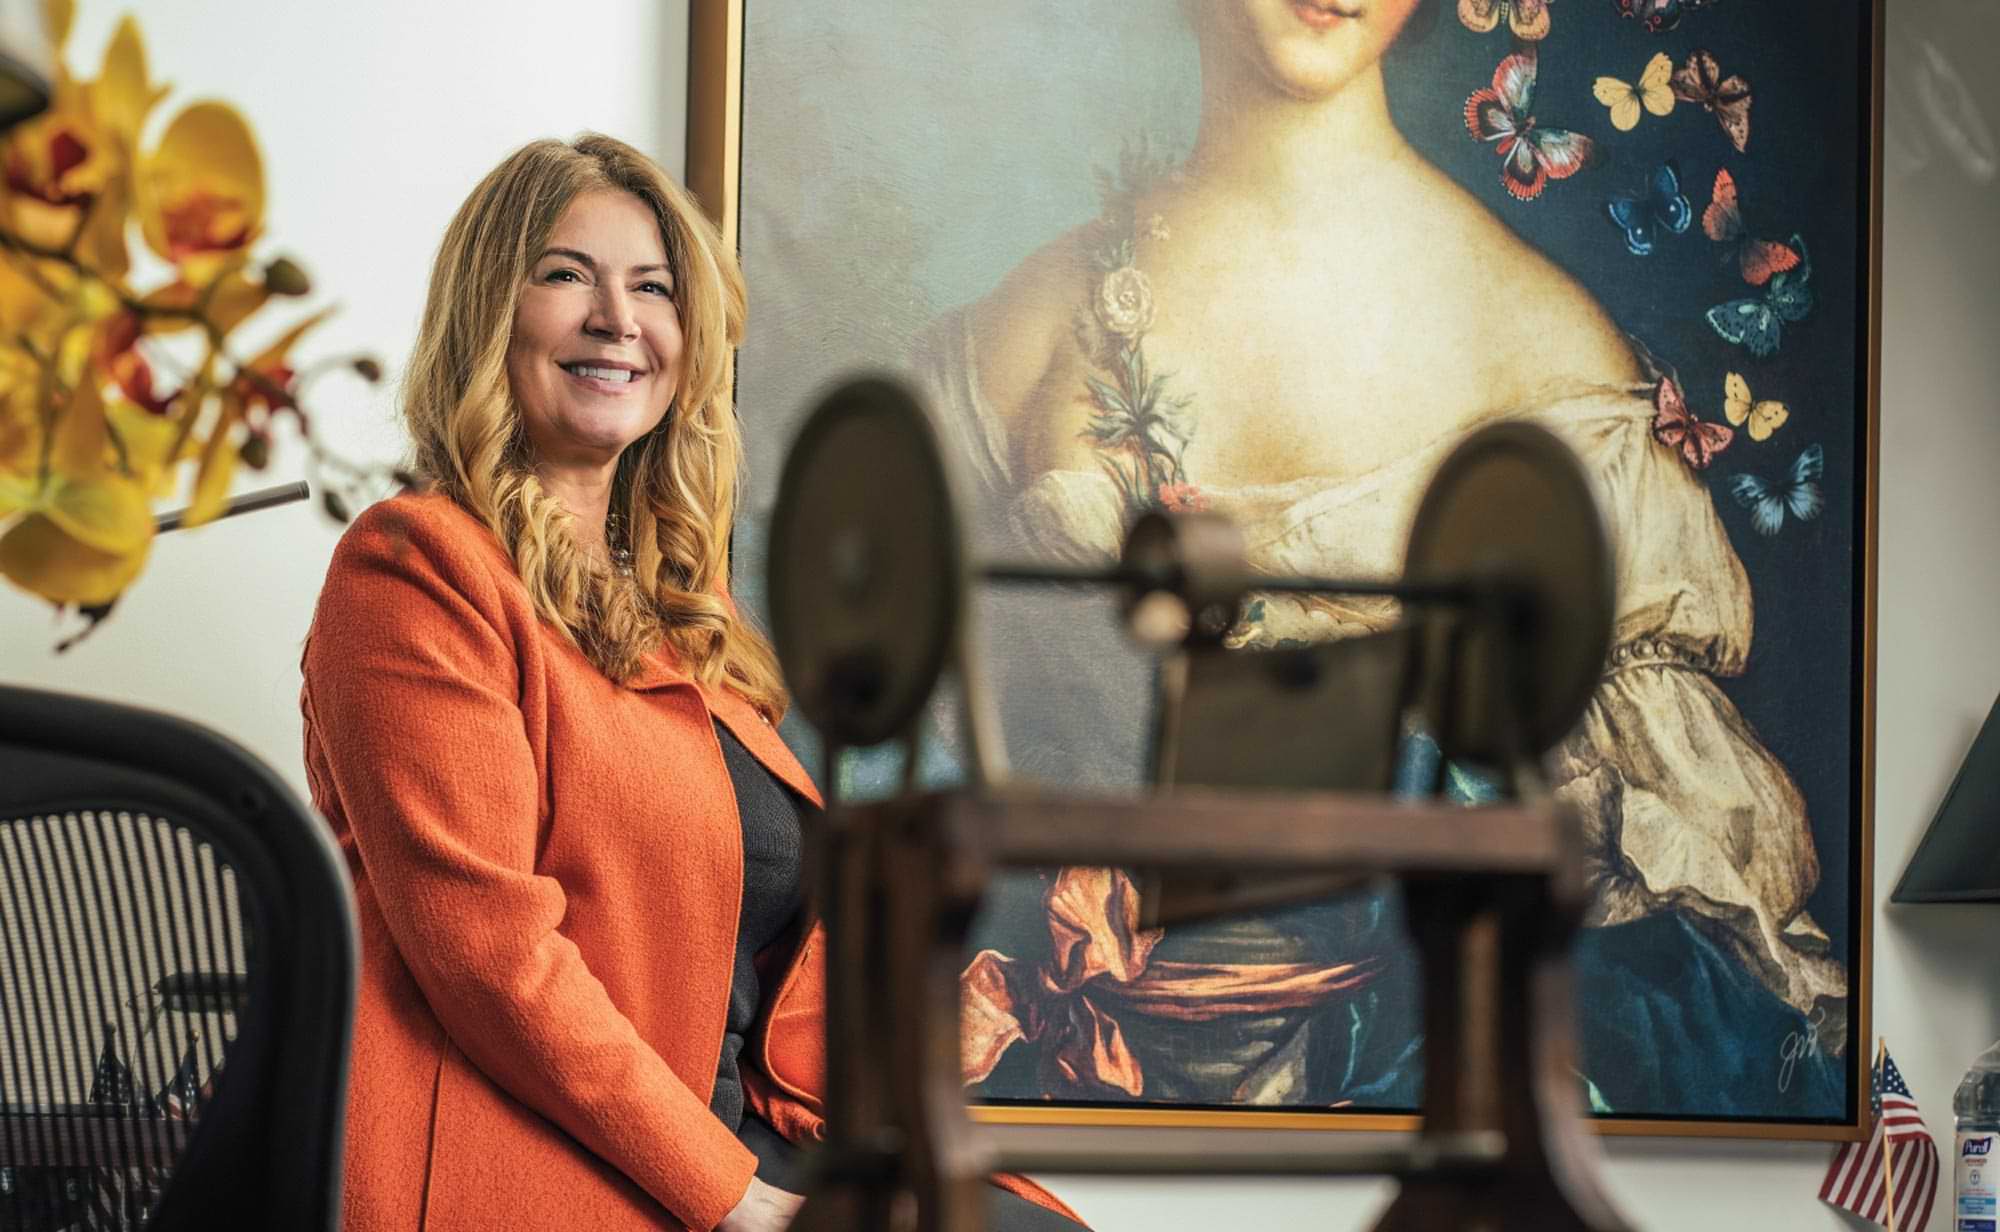 Kathi Vidal smiles while sitting at the edge of a table near a large hanging classical painting